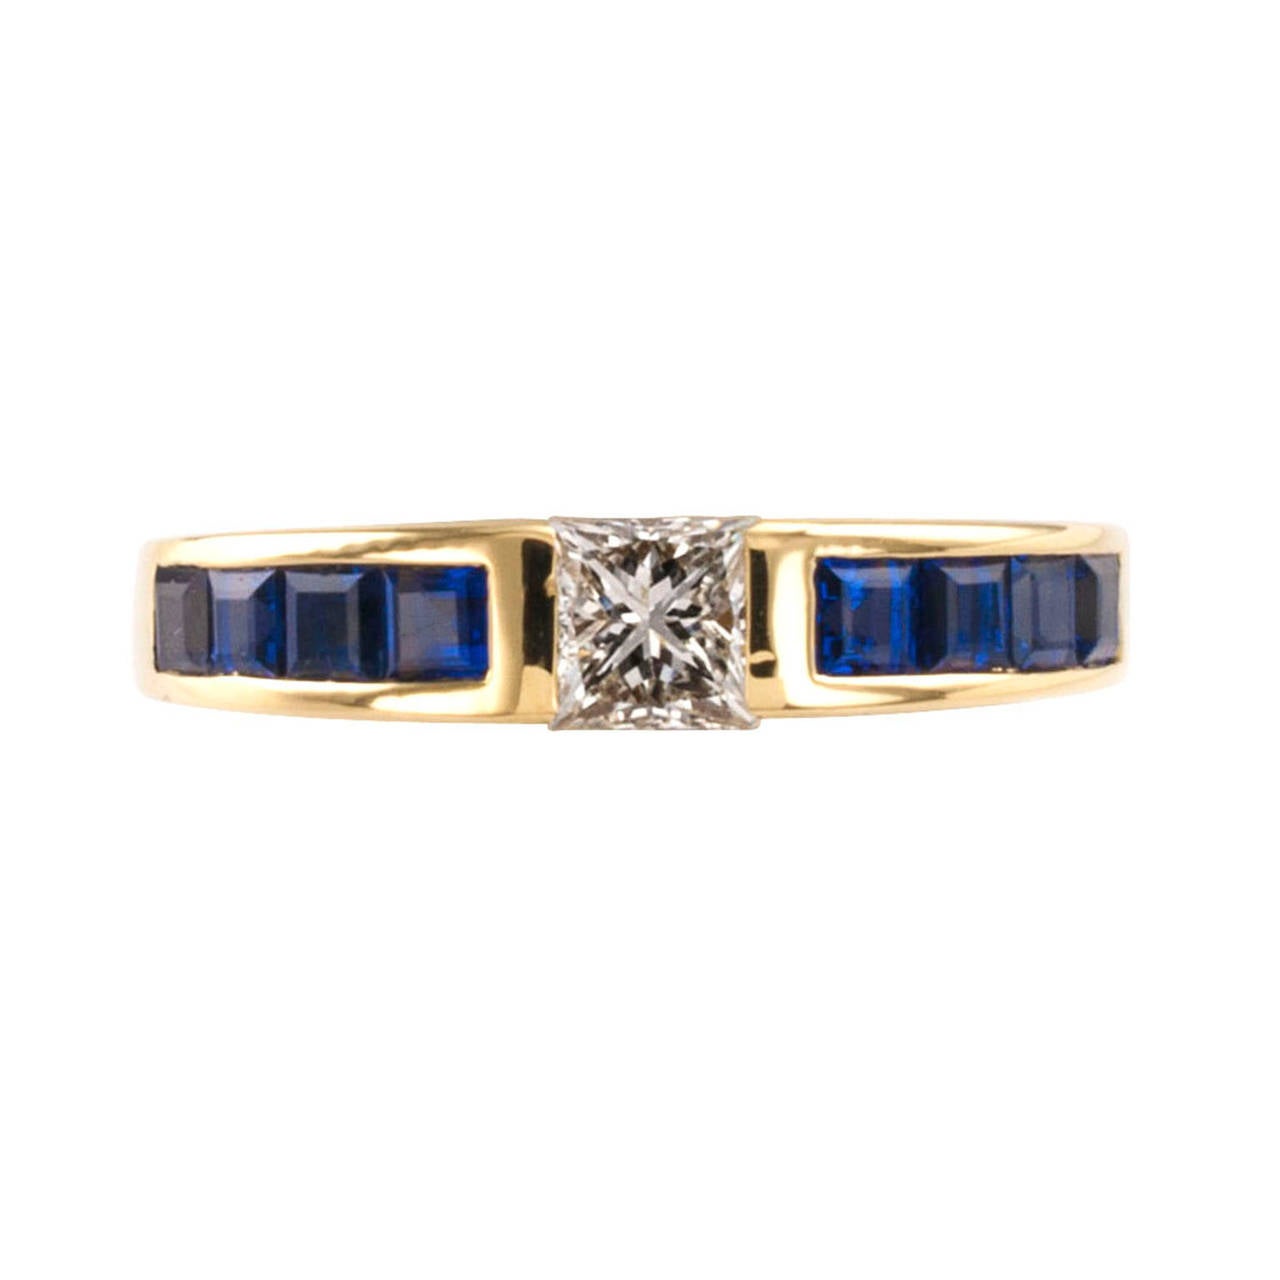 Tiffany Estate Princess-Cut Diamond and Sapphire Ring Band

Very tailored and refined, very Tiffany.  The ring features a princess-cut diamond weighing approximately 0.35 carat, approximately G - H color and VS clarity, set between eight